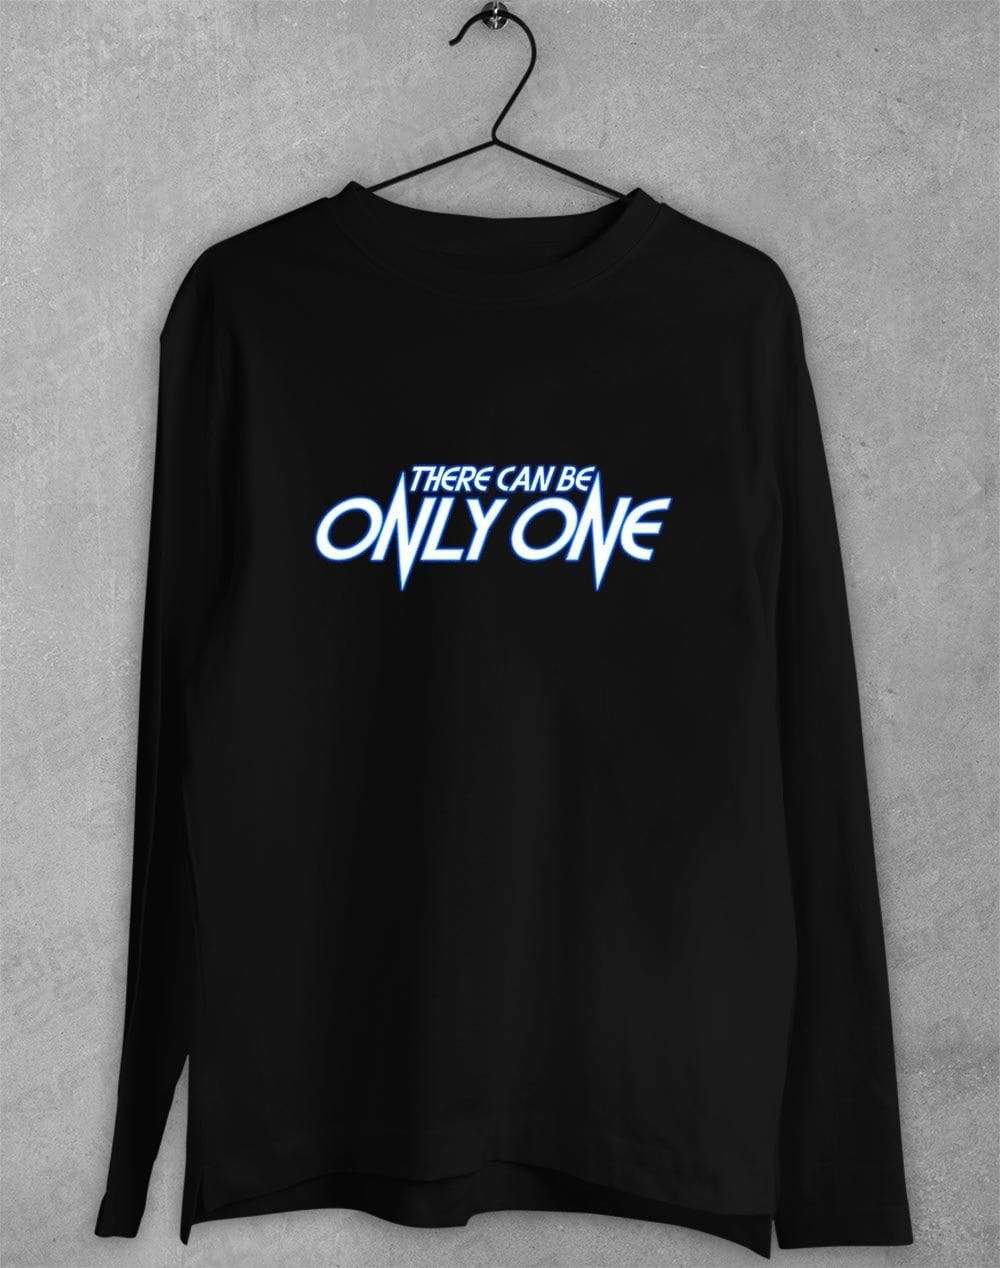 There Can Be Only One Long Sleeve T-Shirt S / Black  - Off World Tees